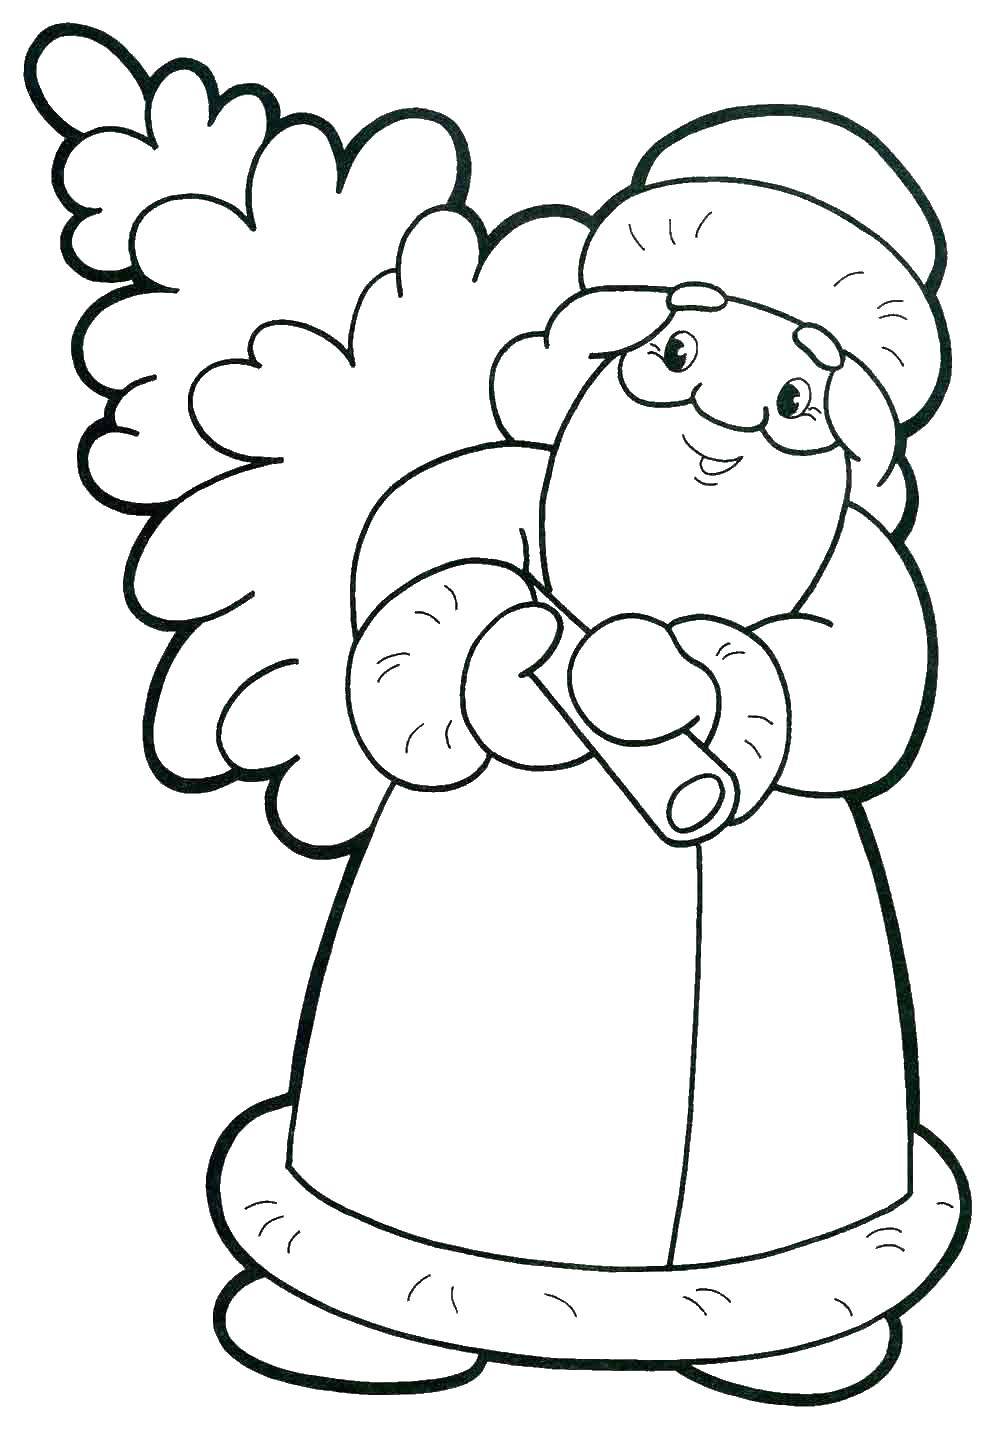 Coloring Santa Claus carries a Christmas tree. Category Santa Claus. Tags:  New Year, Santa Claus.